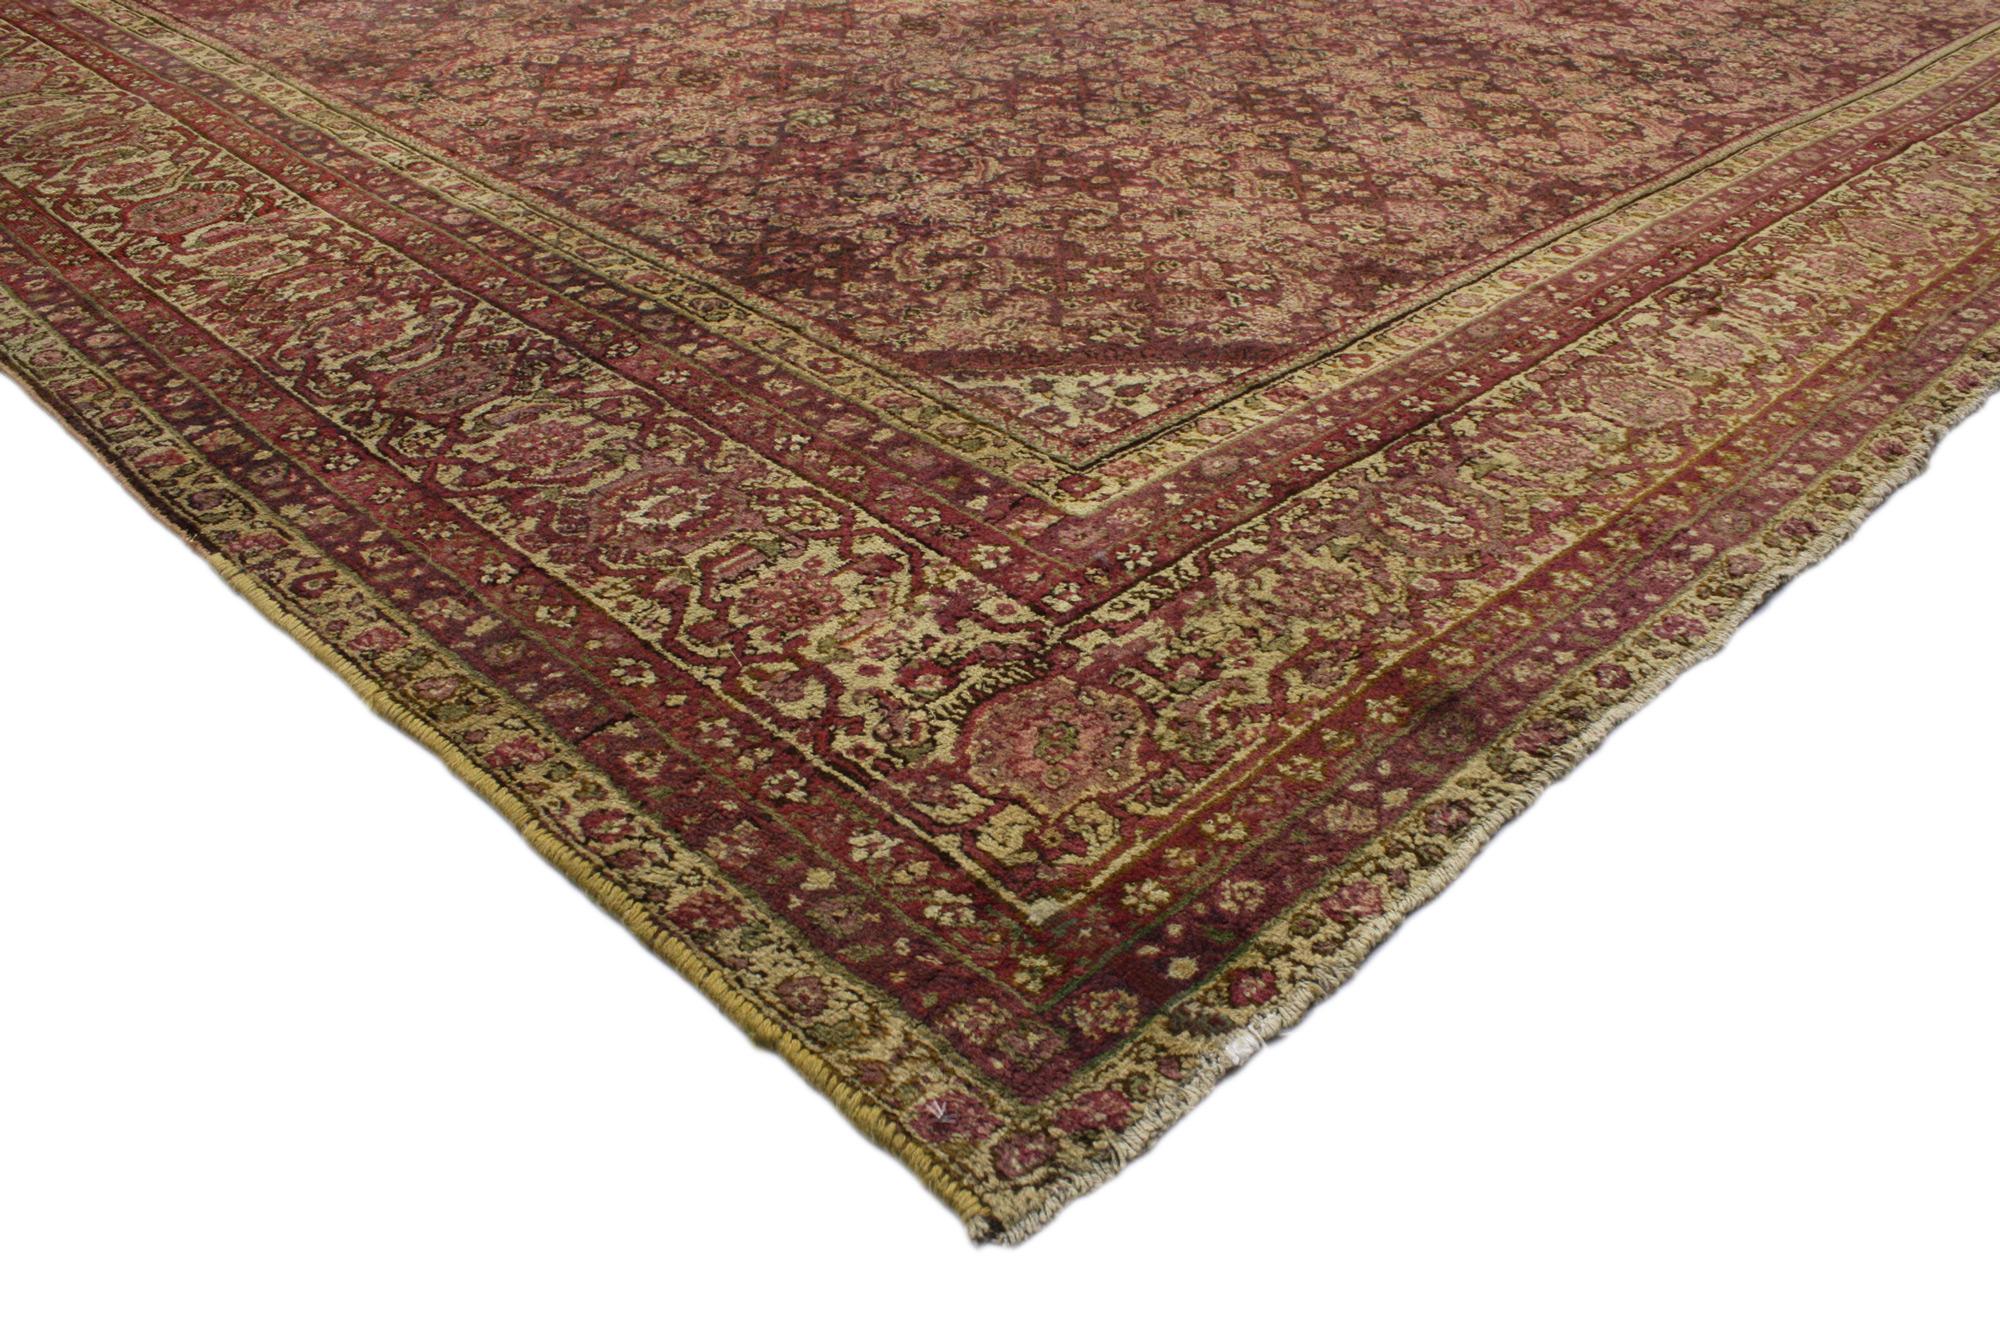 71600 Oversized Antique Indian Agra Rug, 16'00 x 28'00. 
Emanating regal charm with incredible detail and texture, this oversized antique Indian Agra rug is a captivating vision of woven beauty. The intricate Herati design and sophisticated color